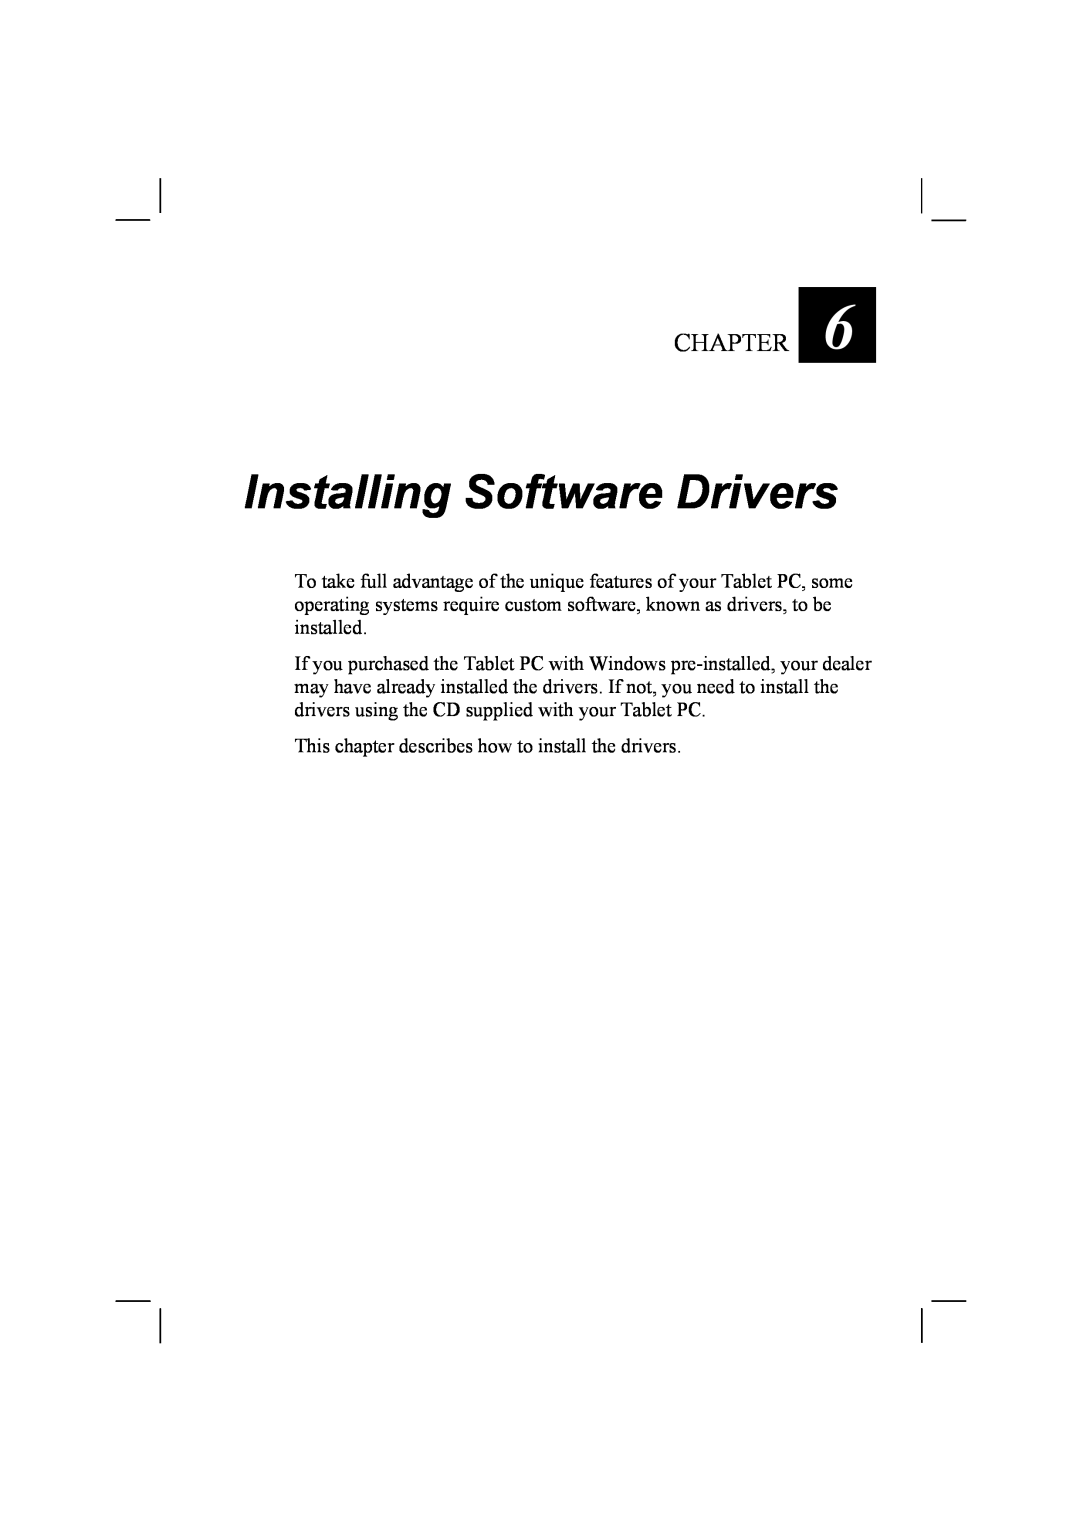 TAG 20 Series manual Installing Software Drivers, Chapter 